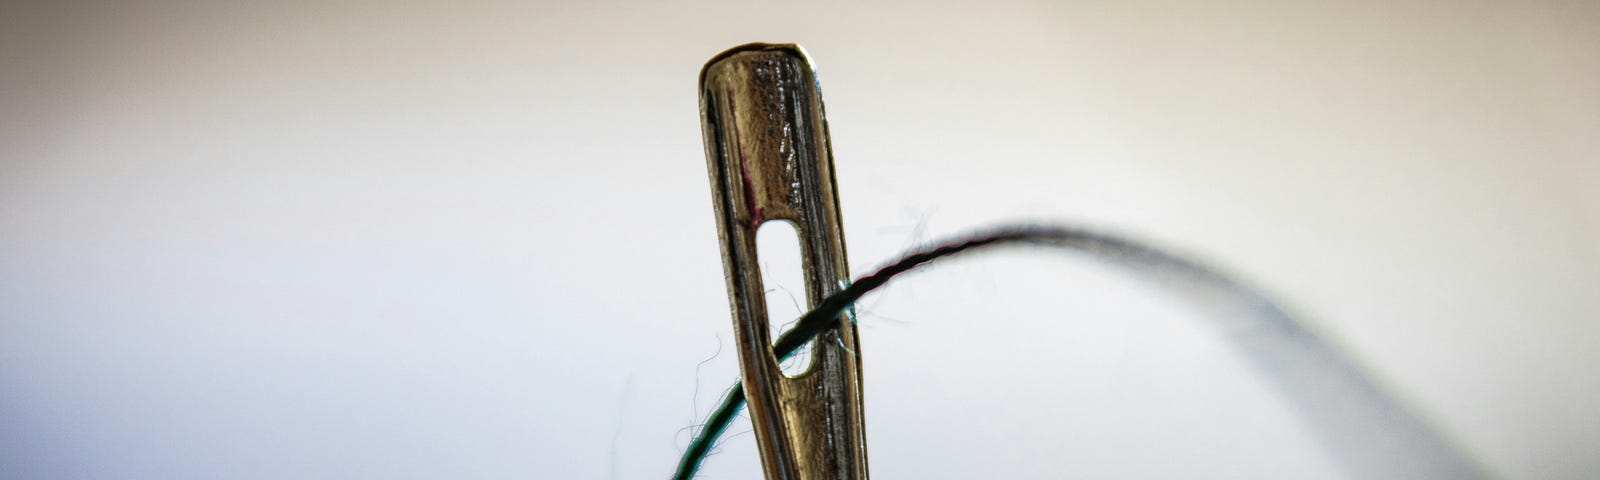 a needle being thread